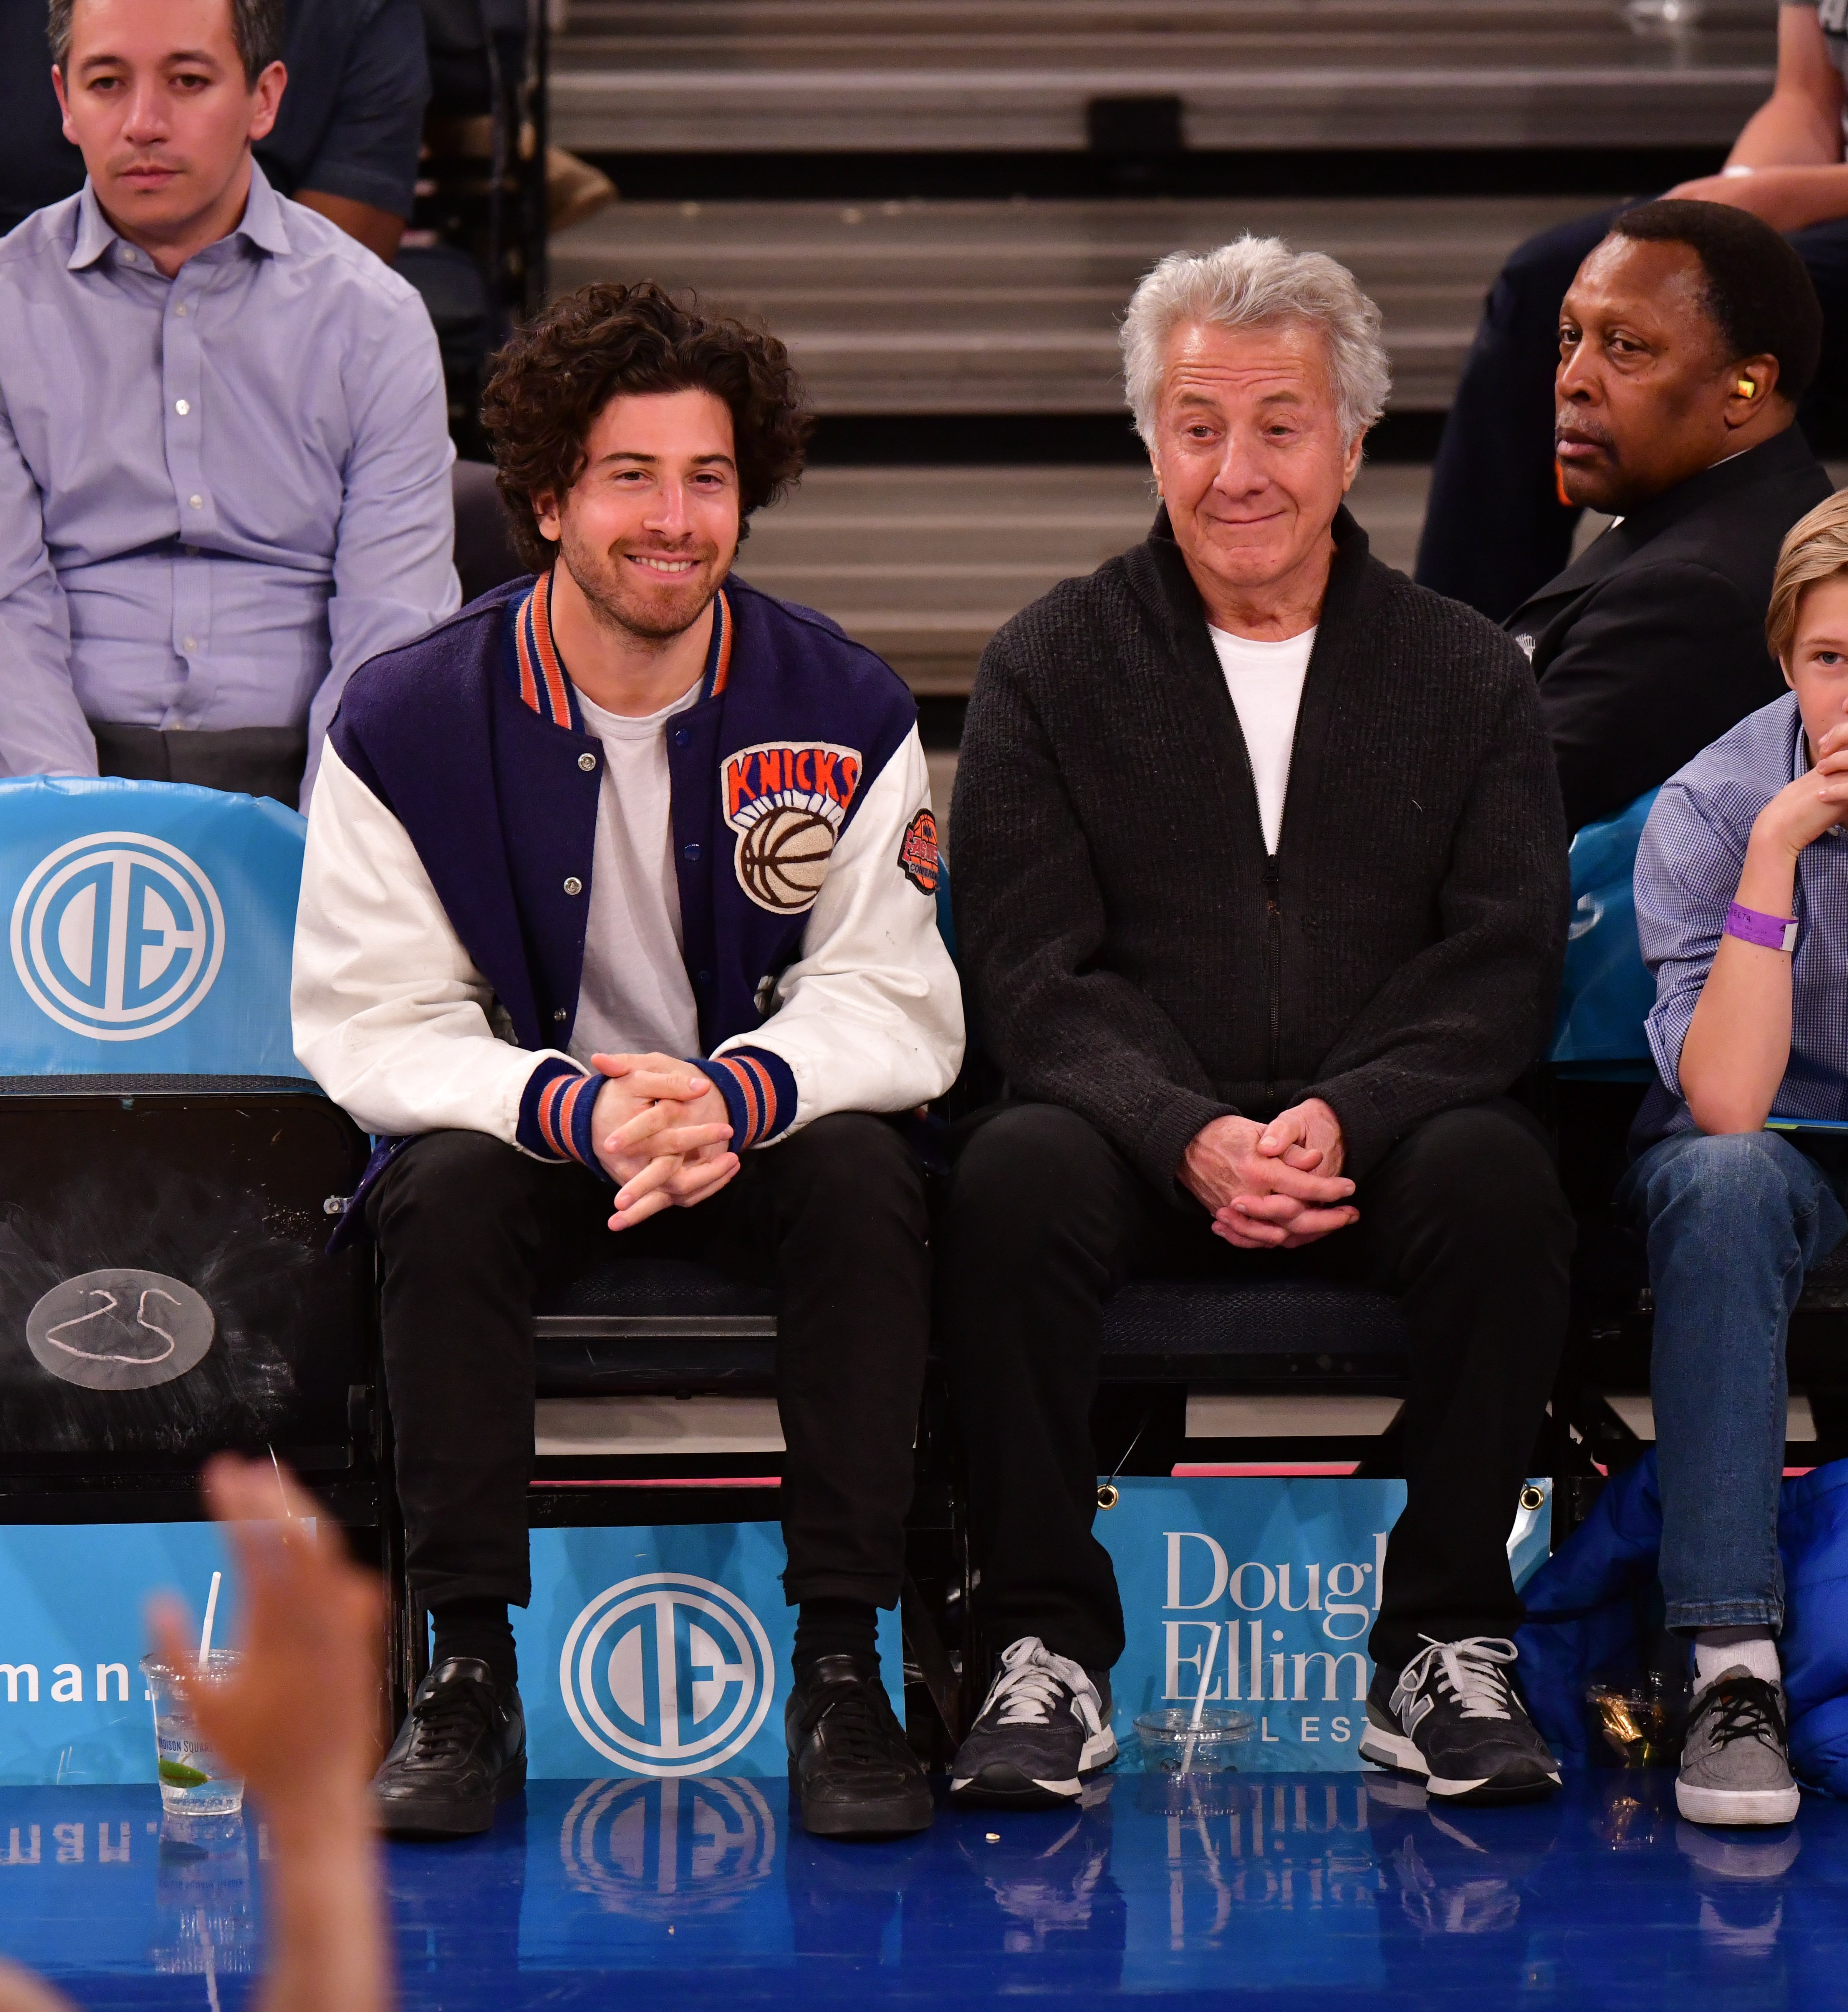 Jake Hoffman and Dustin Hoffman attend Detroit Pistons v New York Knicks game at Madison Square Garden on April 10, 2019 in New York | Source: Getty Images